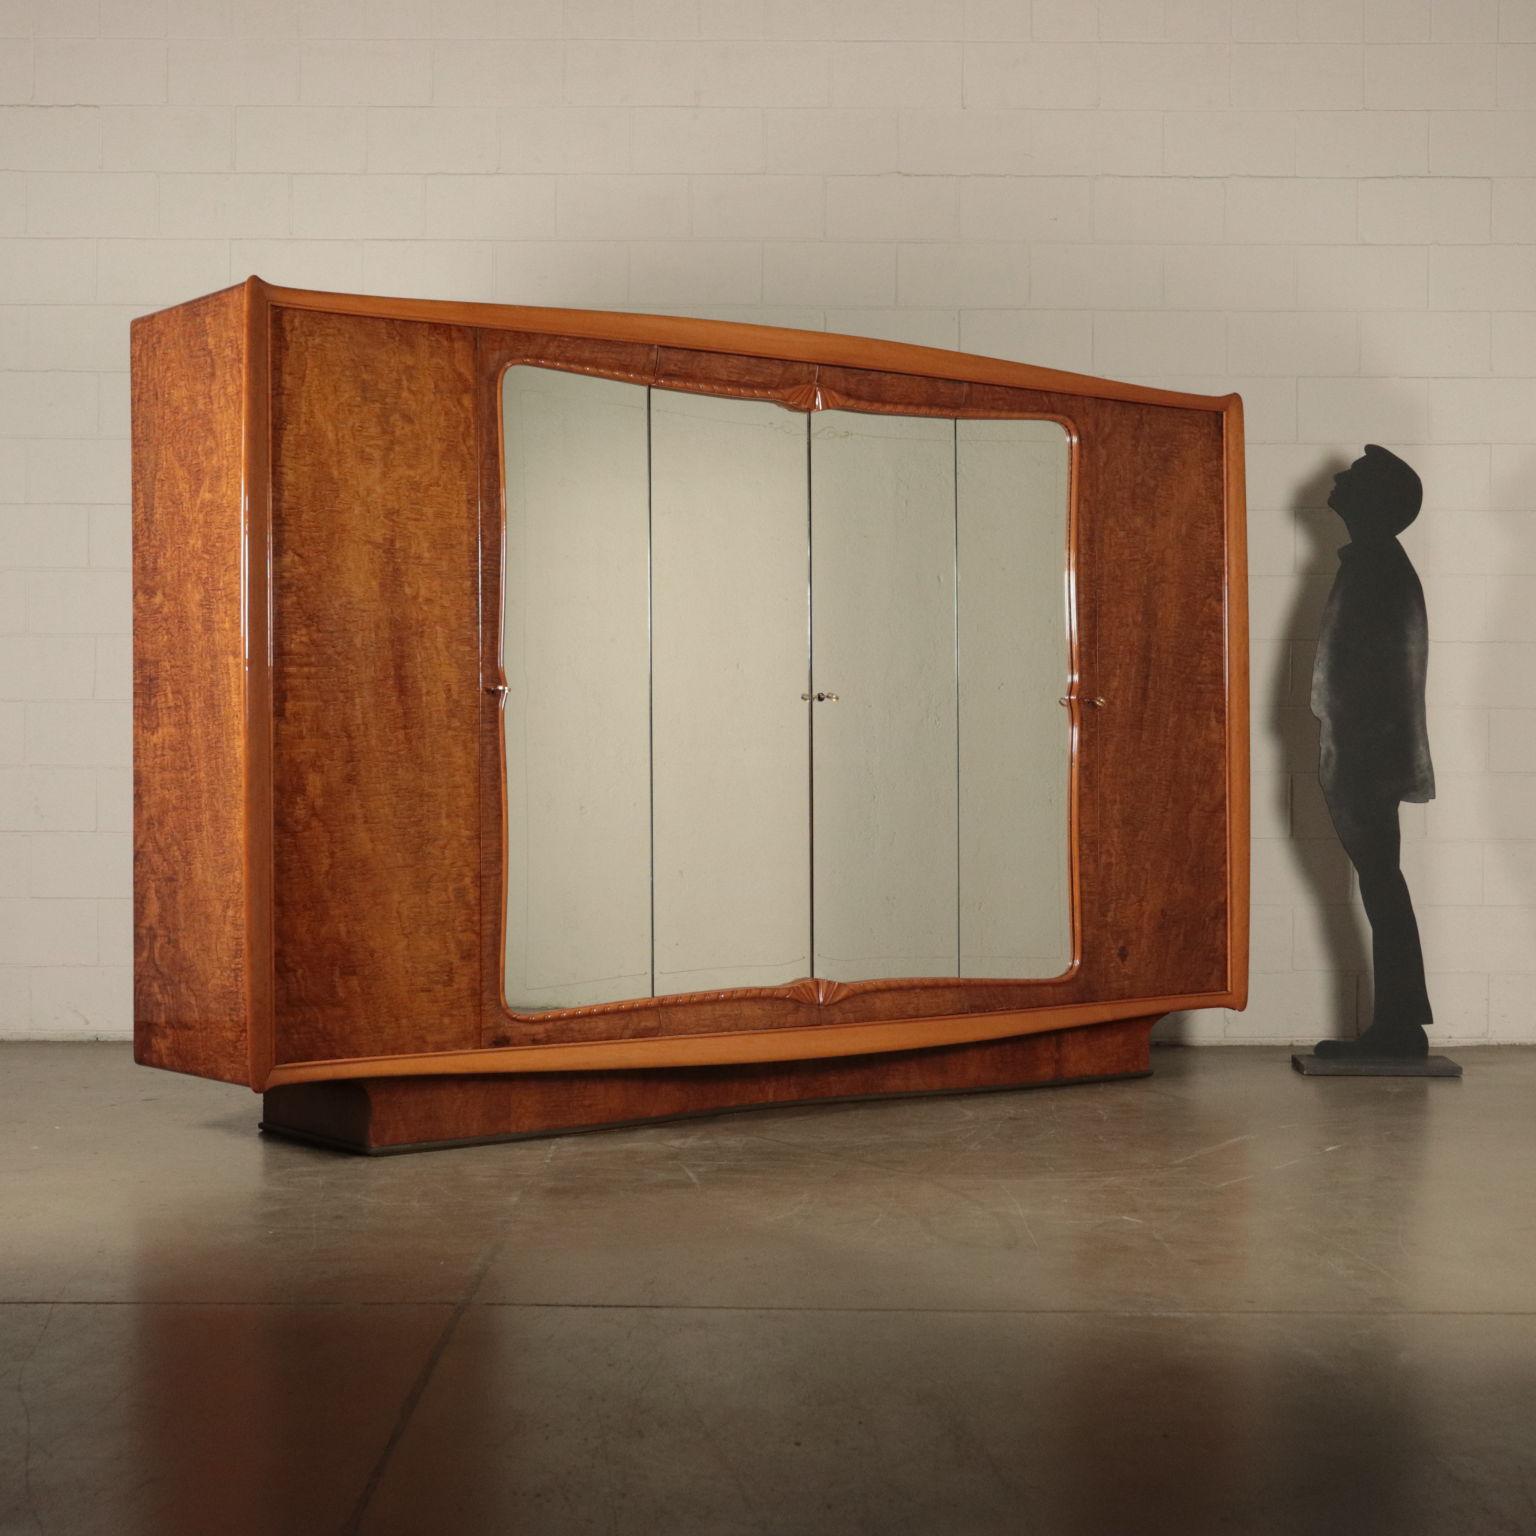 Wardrobe with swing doors; burl veneered wood with polyester finishing and mirror. Good conditions, shows small signs of wear.